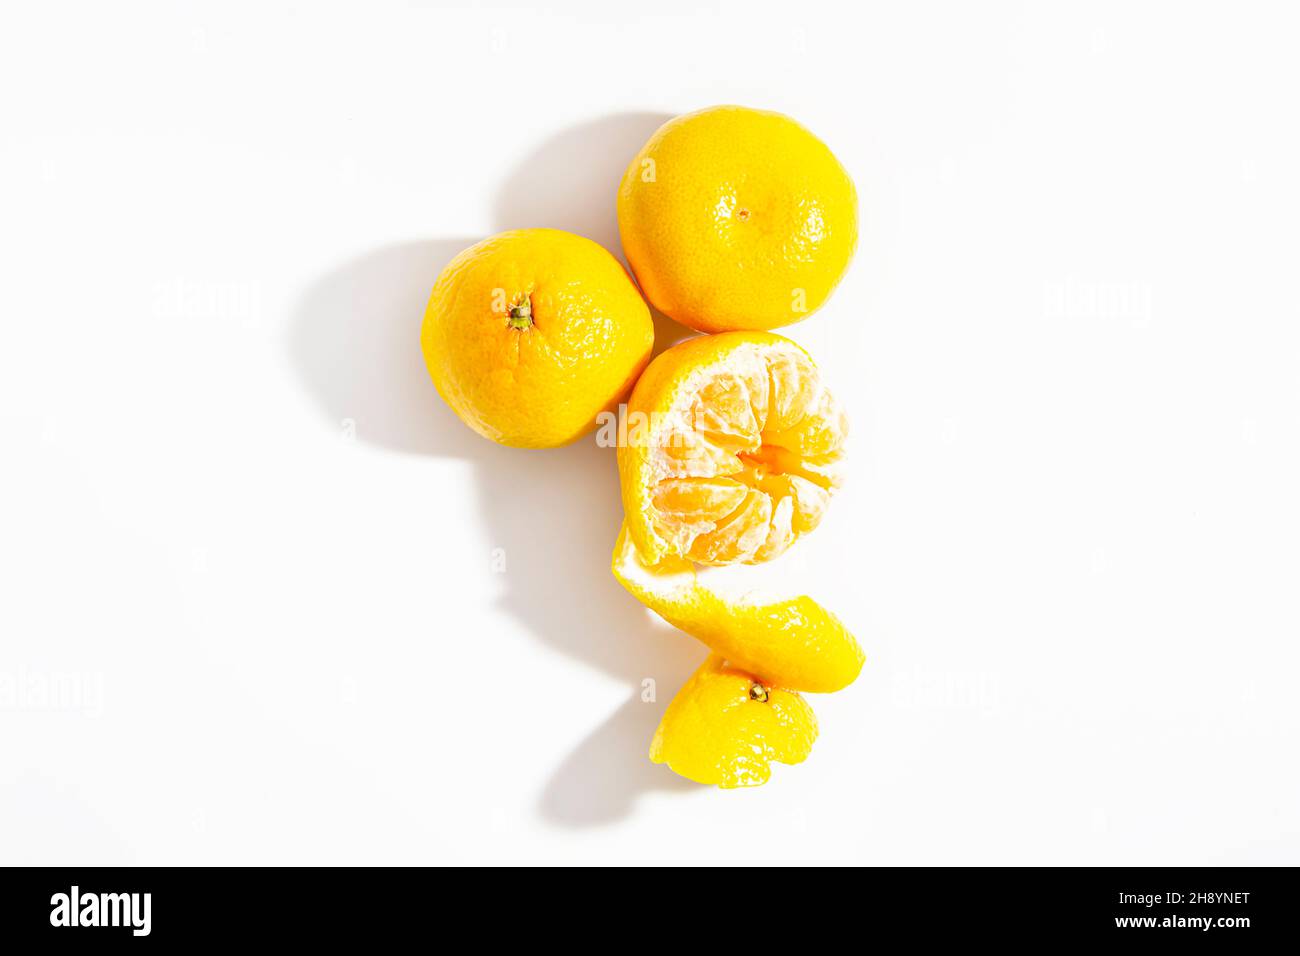 Tangerine half peeled and two whole tangerines lie on a white background. Isolate. Lifestyle. Close-up. View from above. Horizontal photo. High quality photo Stock Photo